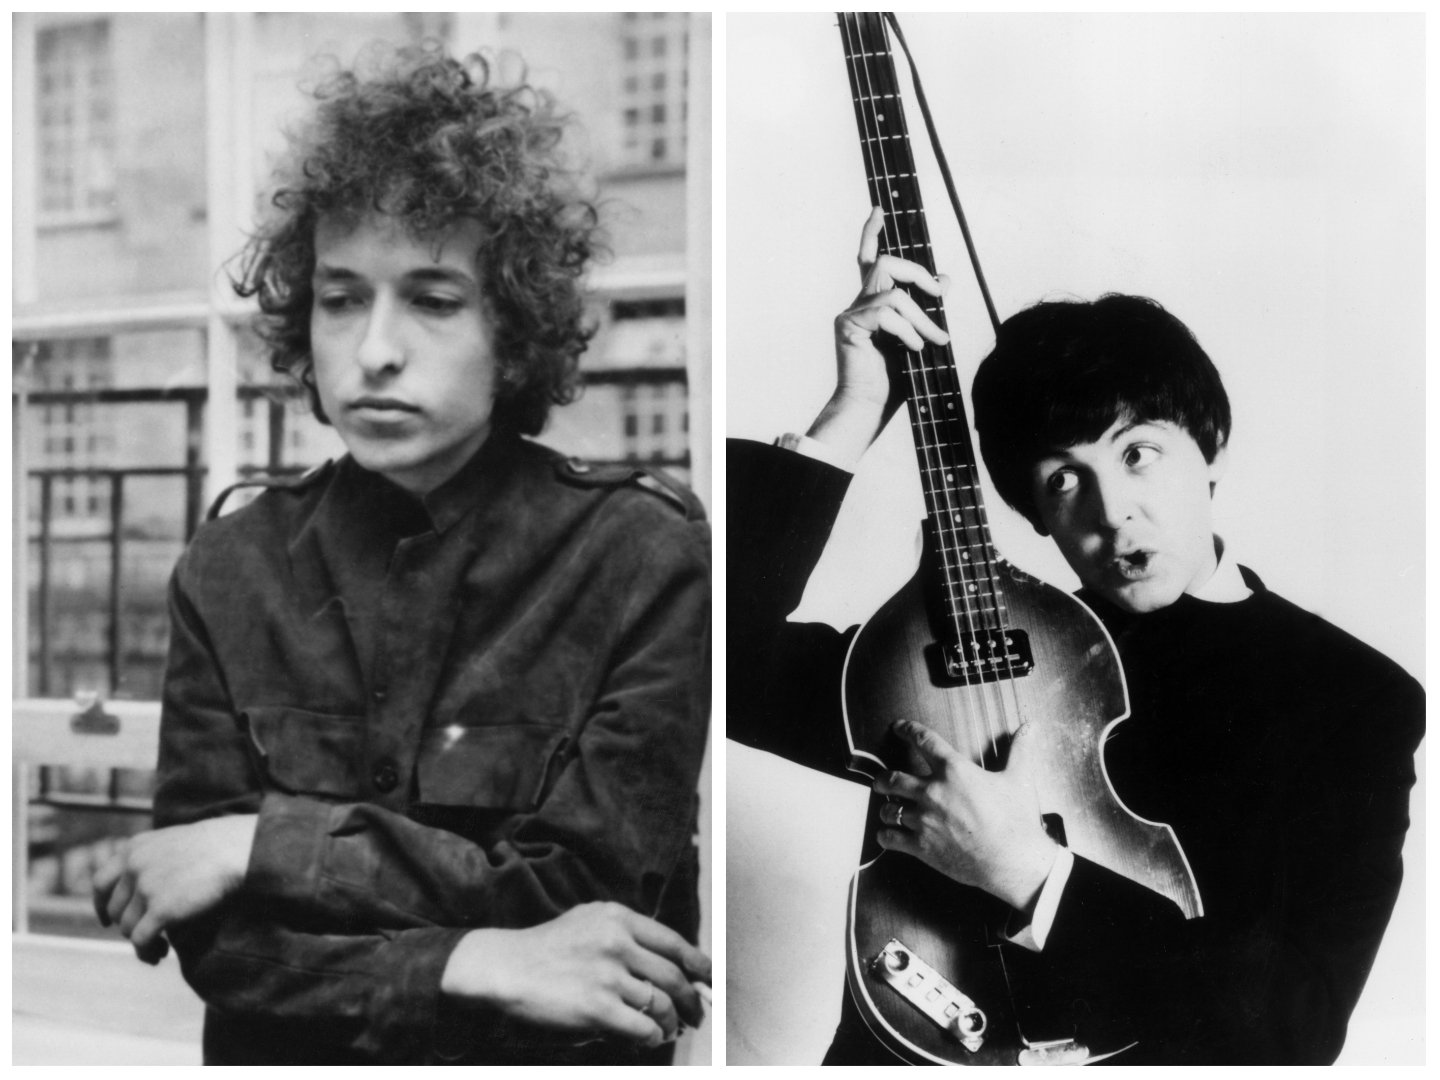 A black and white picture of Bob Dylan leaning against a window. Paul McCartney holds up his bass guitar.